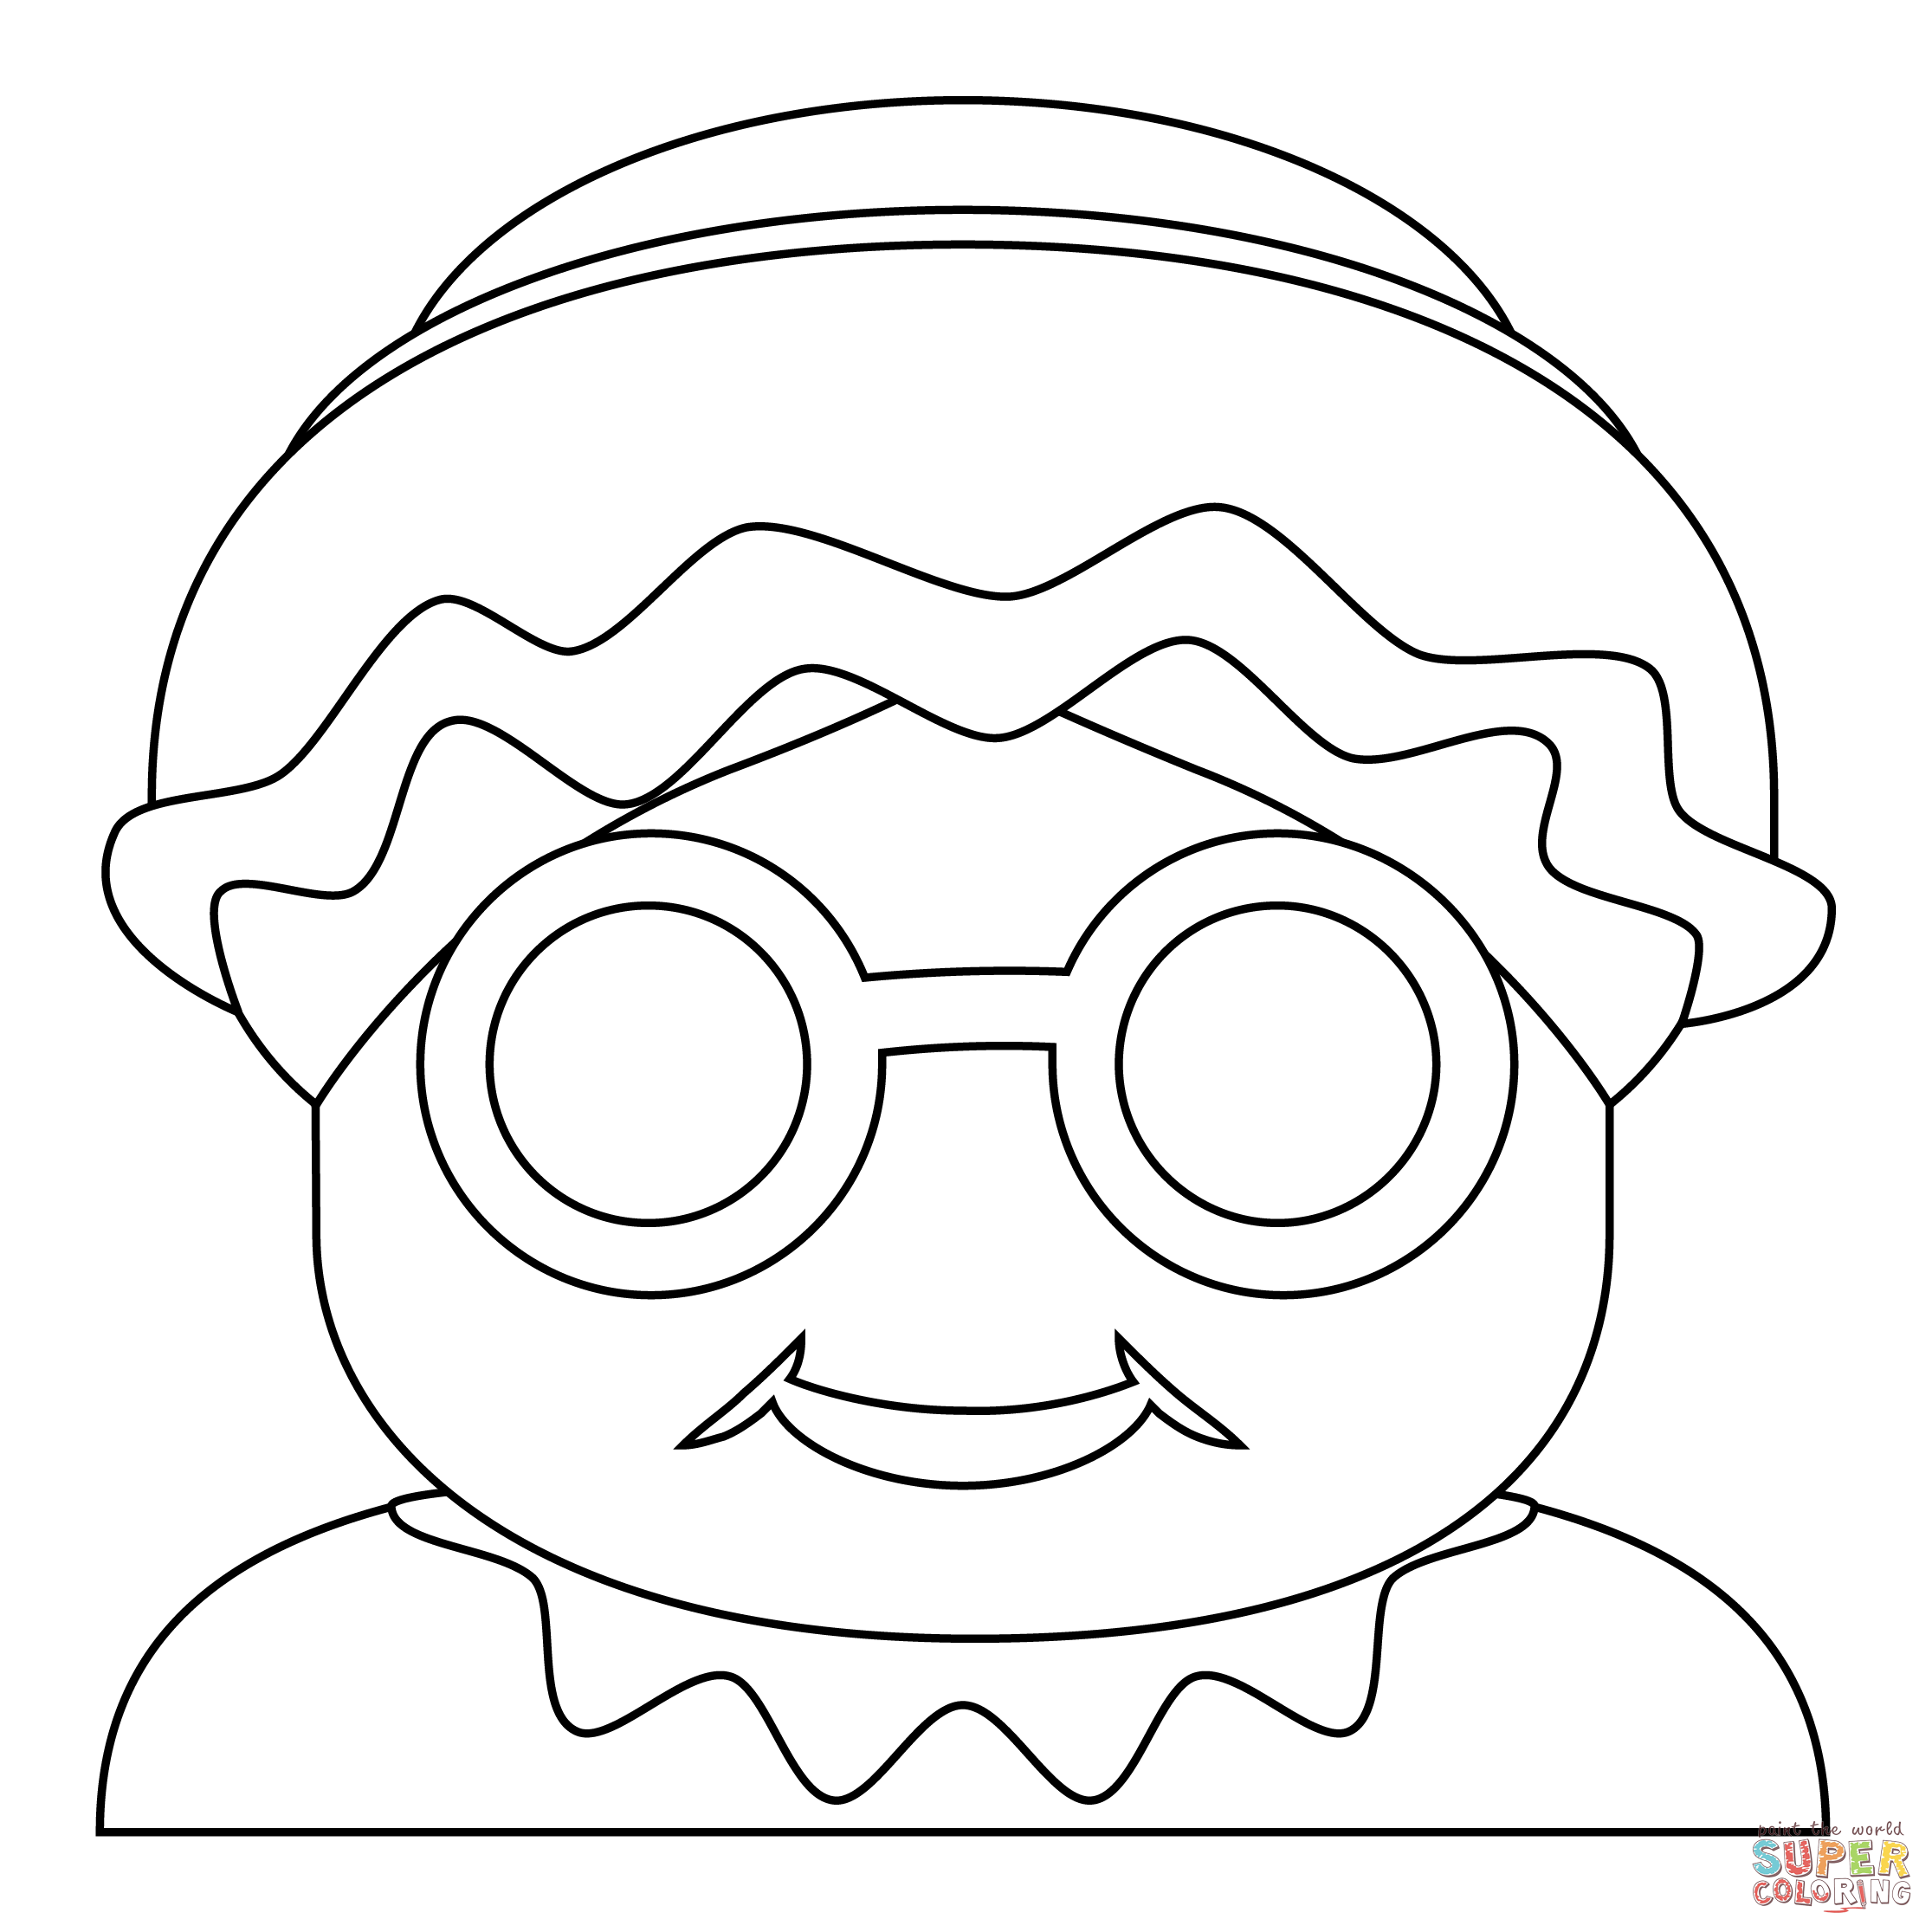 Mrs claus coloring page free printable coloring pages